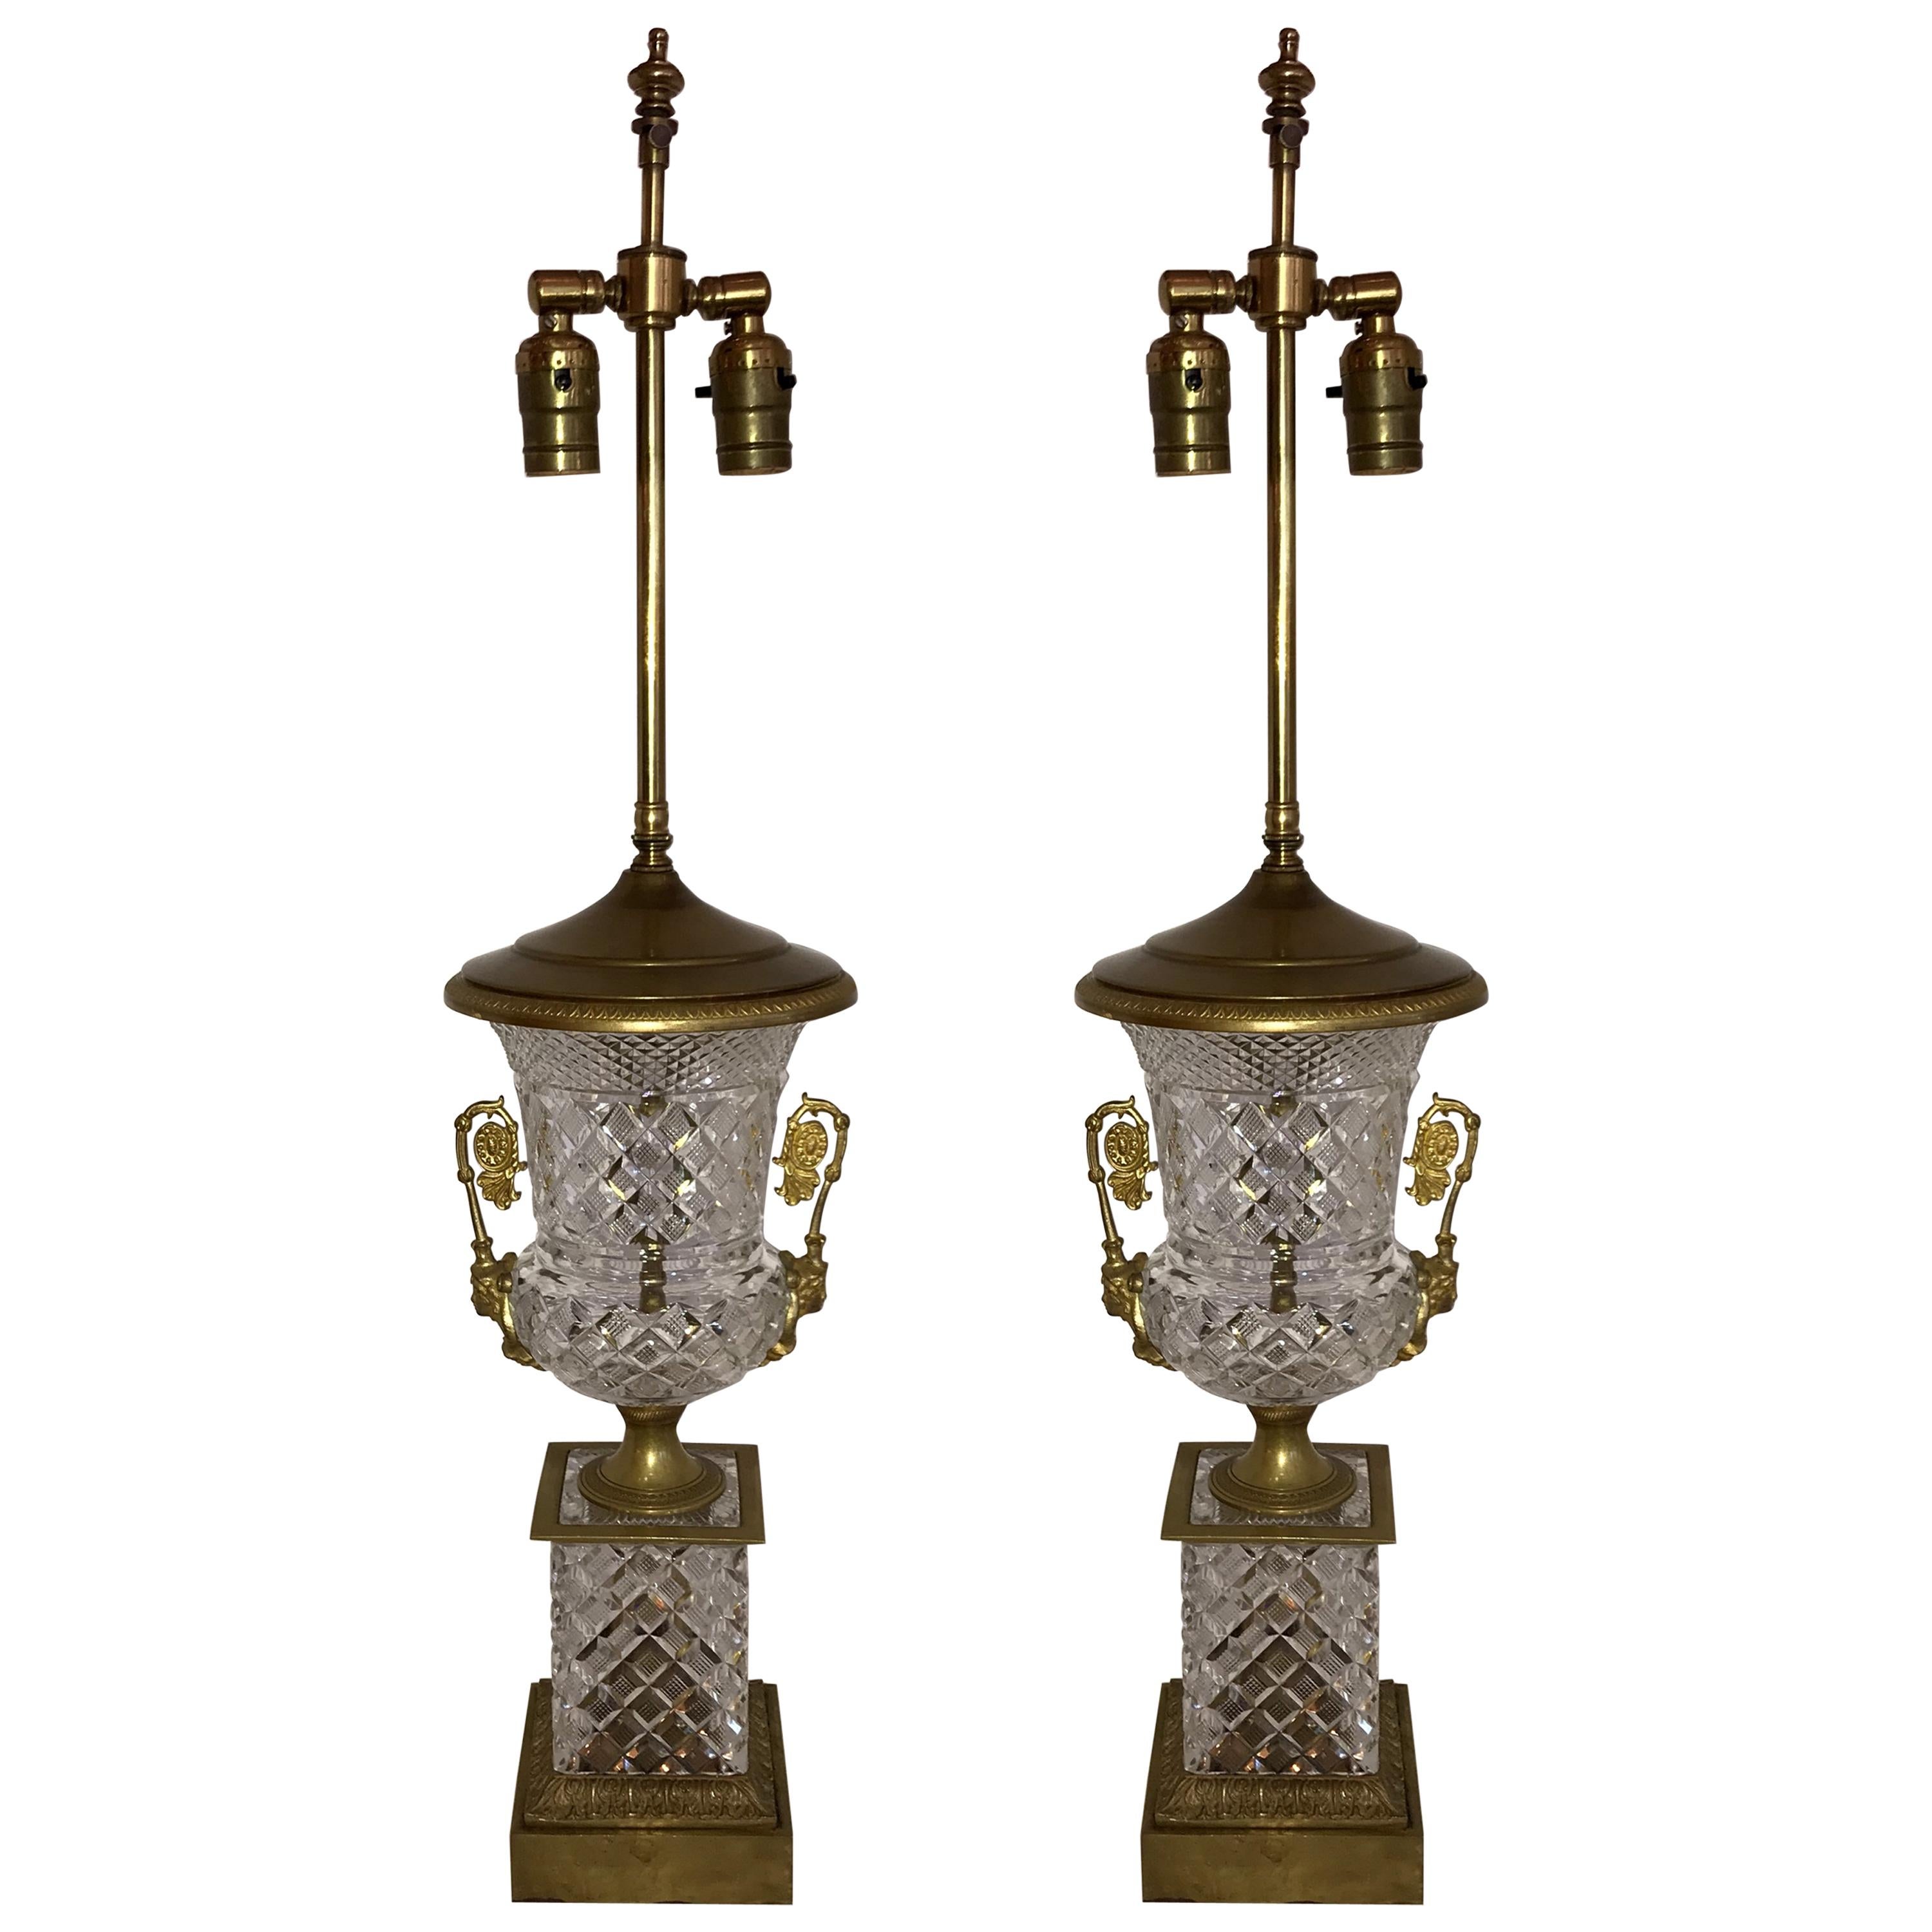 Wonderful Pair of French Empire Neoclassical Cut Crystal Bronze Ormolu Urn Lamps